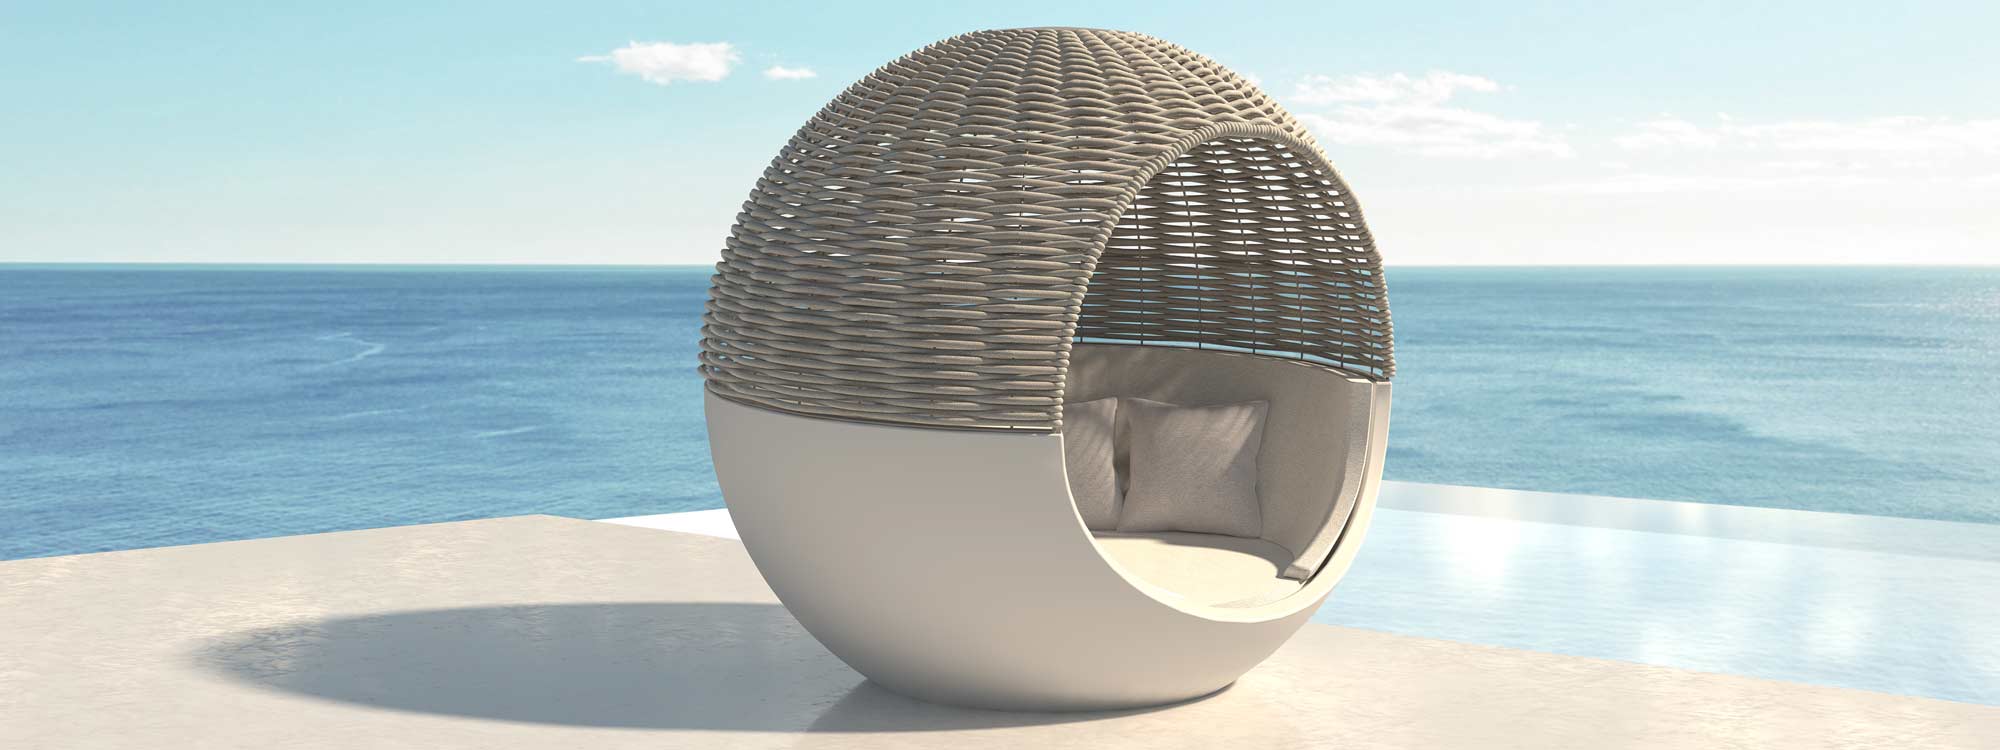 Image of Vondom Moon white garden daybed with taupe hand-woven rope canopy